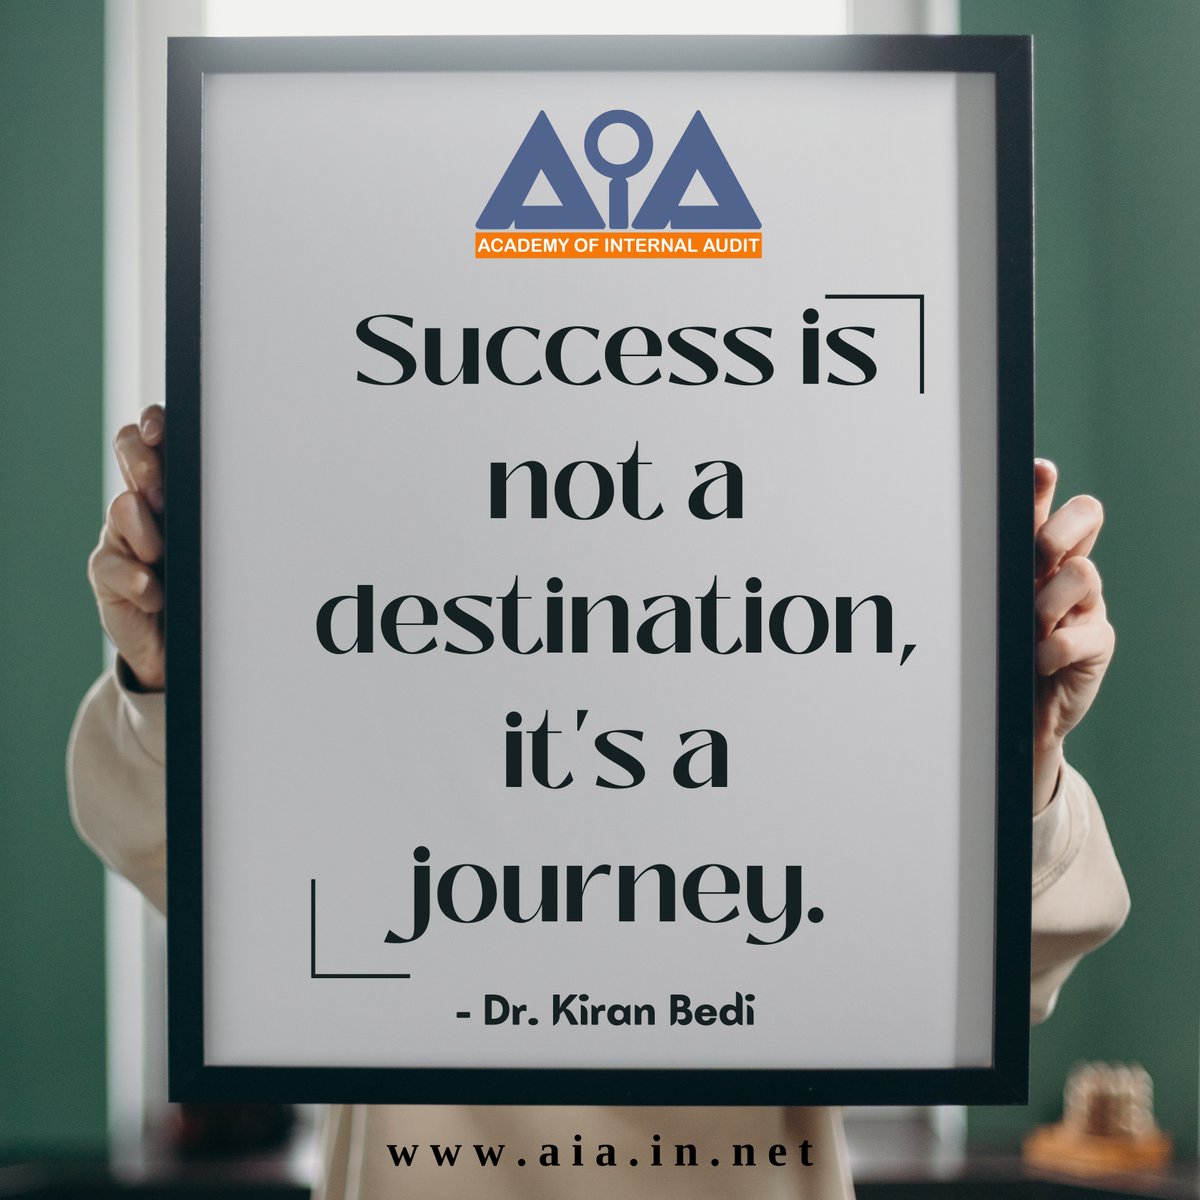 Success isn't a stop, but a path we tread🚀Embrace the journey, for therein lies the true essence of triumph. 🌟

#mondaymotivations #MotivationMonday #PositiveVibesOnly #InspirationalQuotes #CFE #ACFE #AIA #CAMS #CIA #ACAMS #CIAchallenge #antimoneylaundering #IIA #SuccessJourney